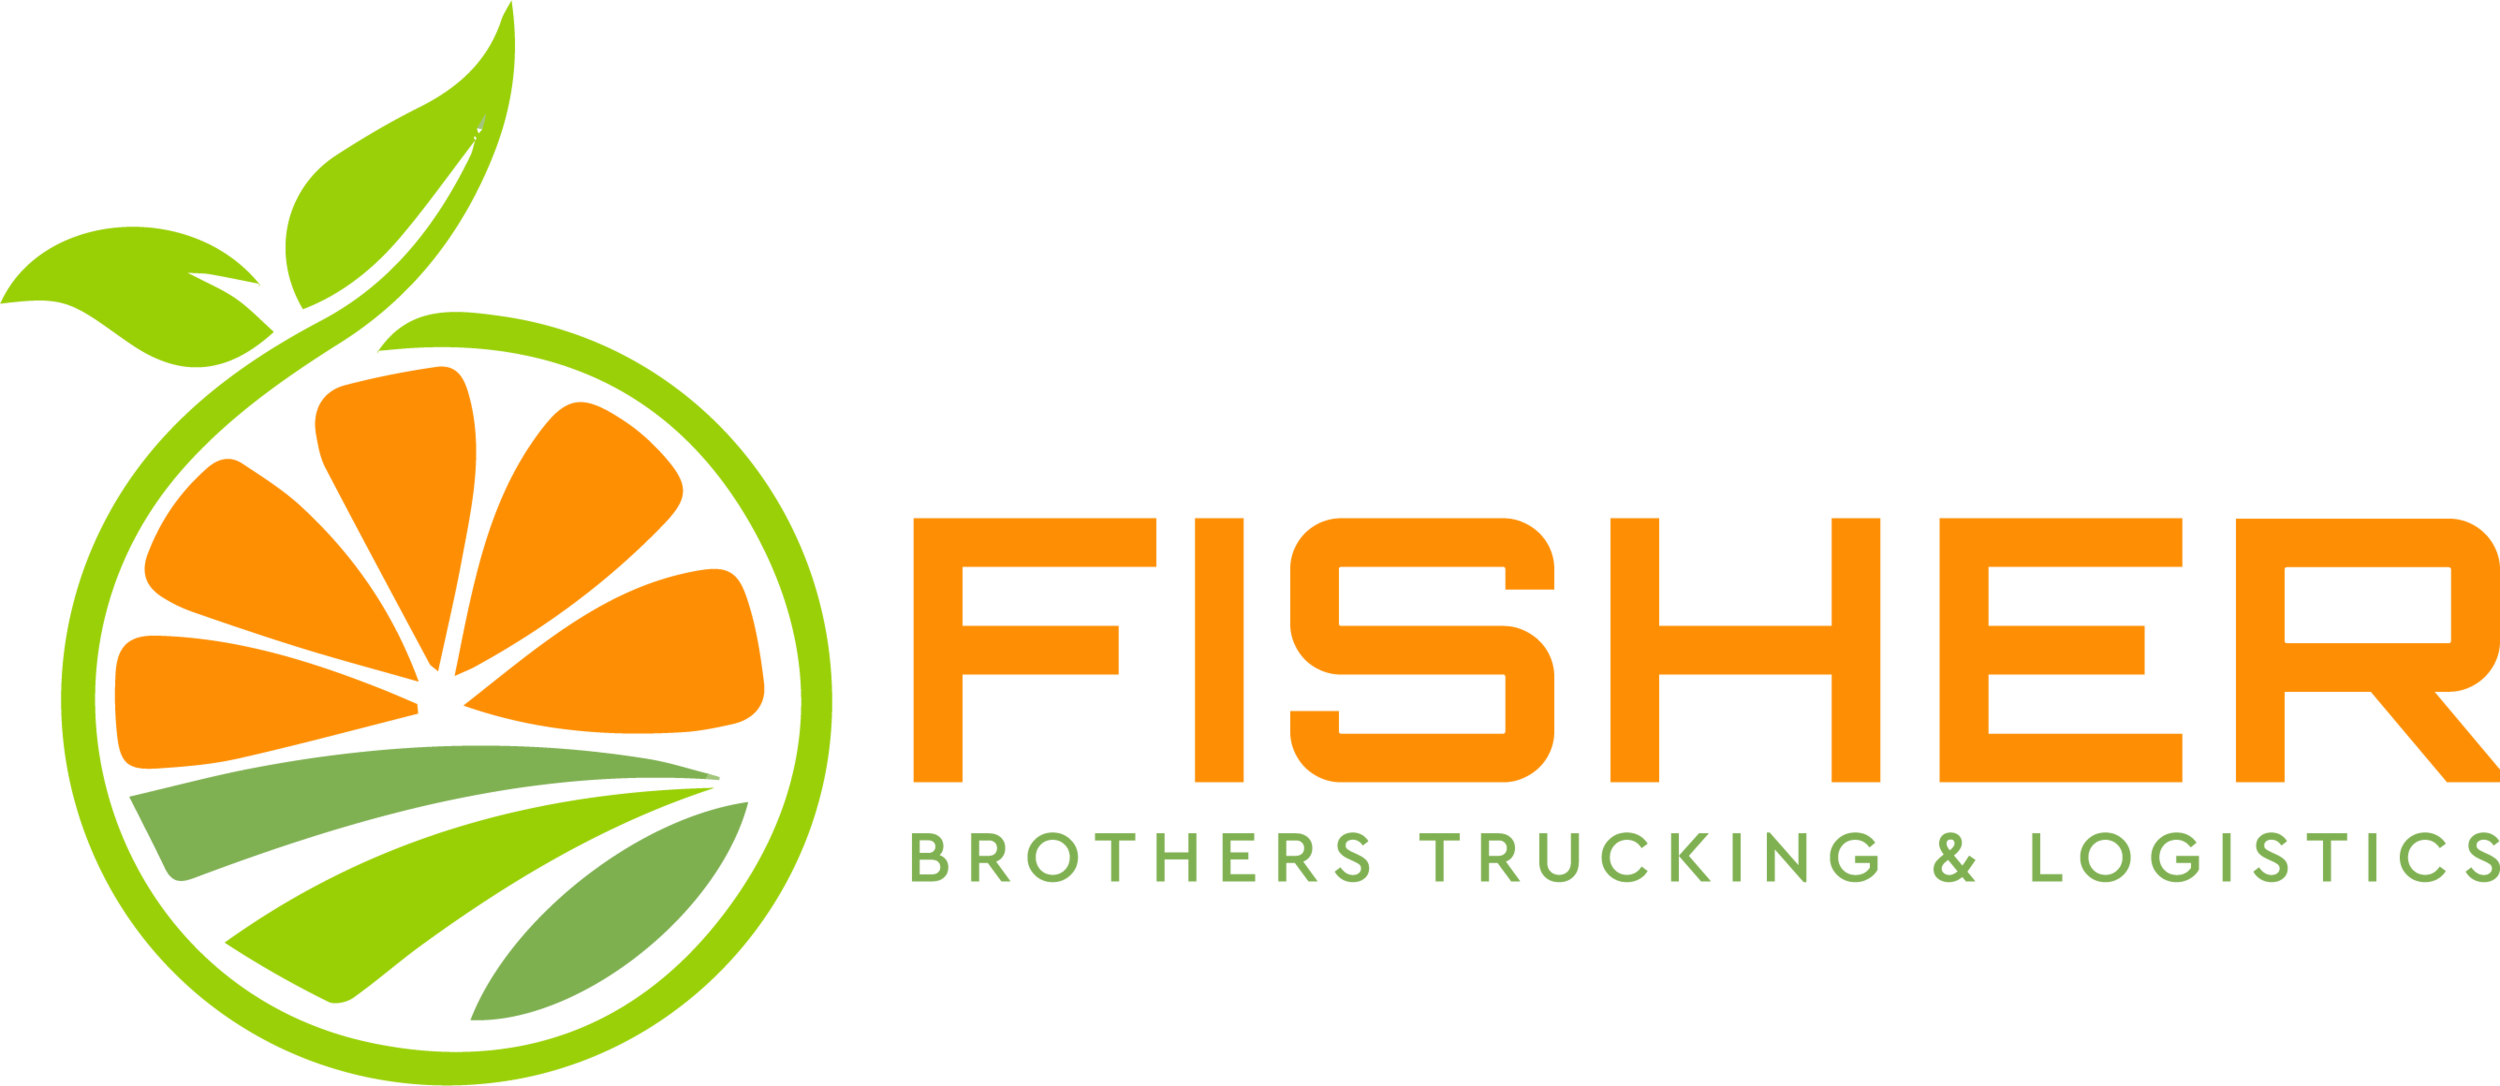 Fisher-Brothers_Logo_Main.png